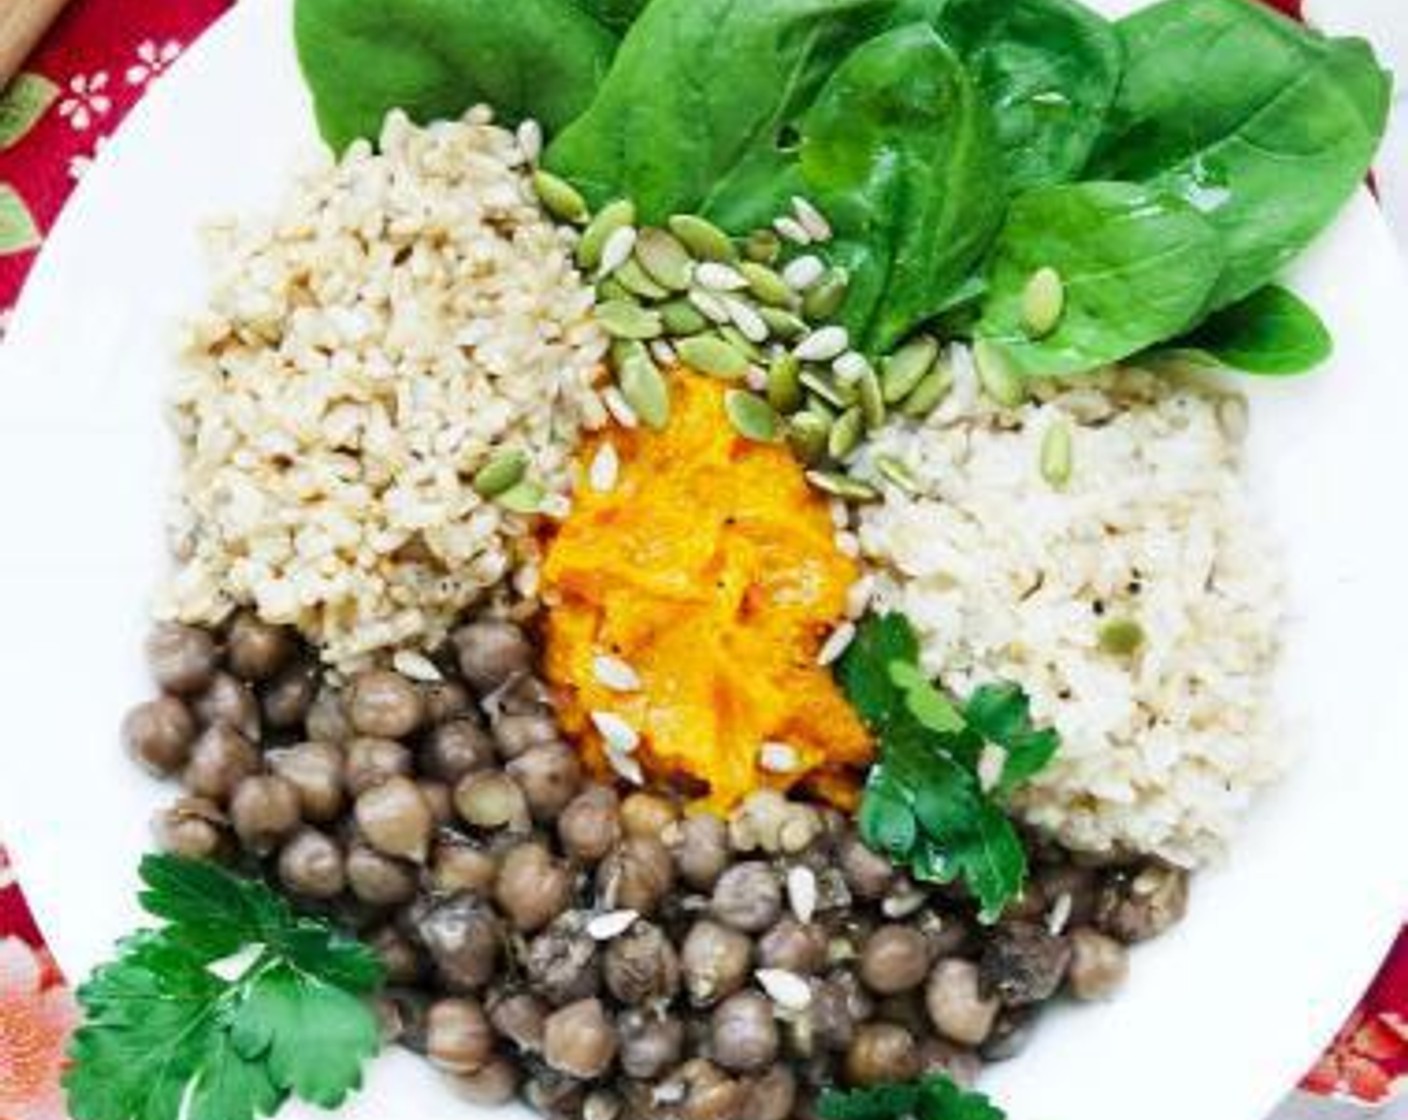 Savory Rice and Oat Bowl with Green Tea Chickpeas